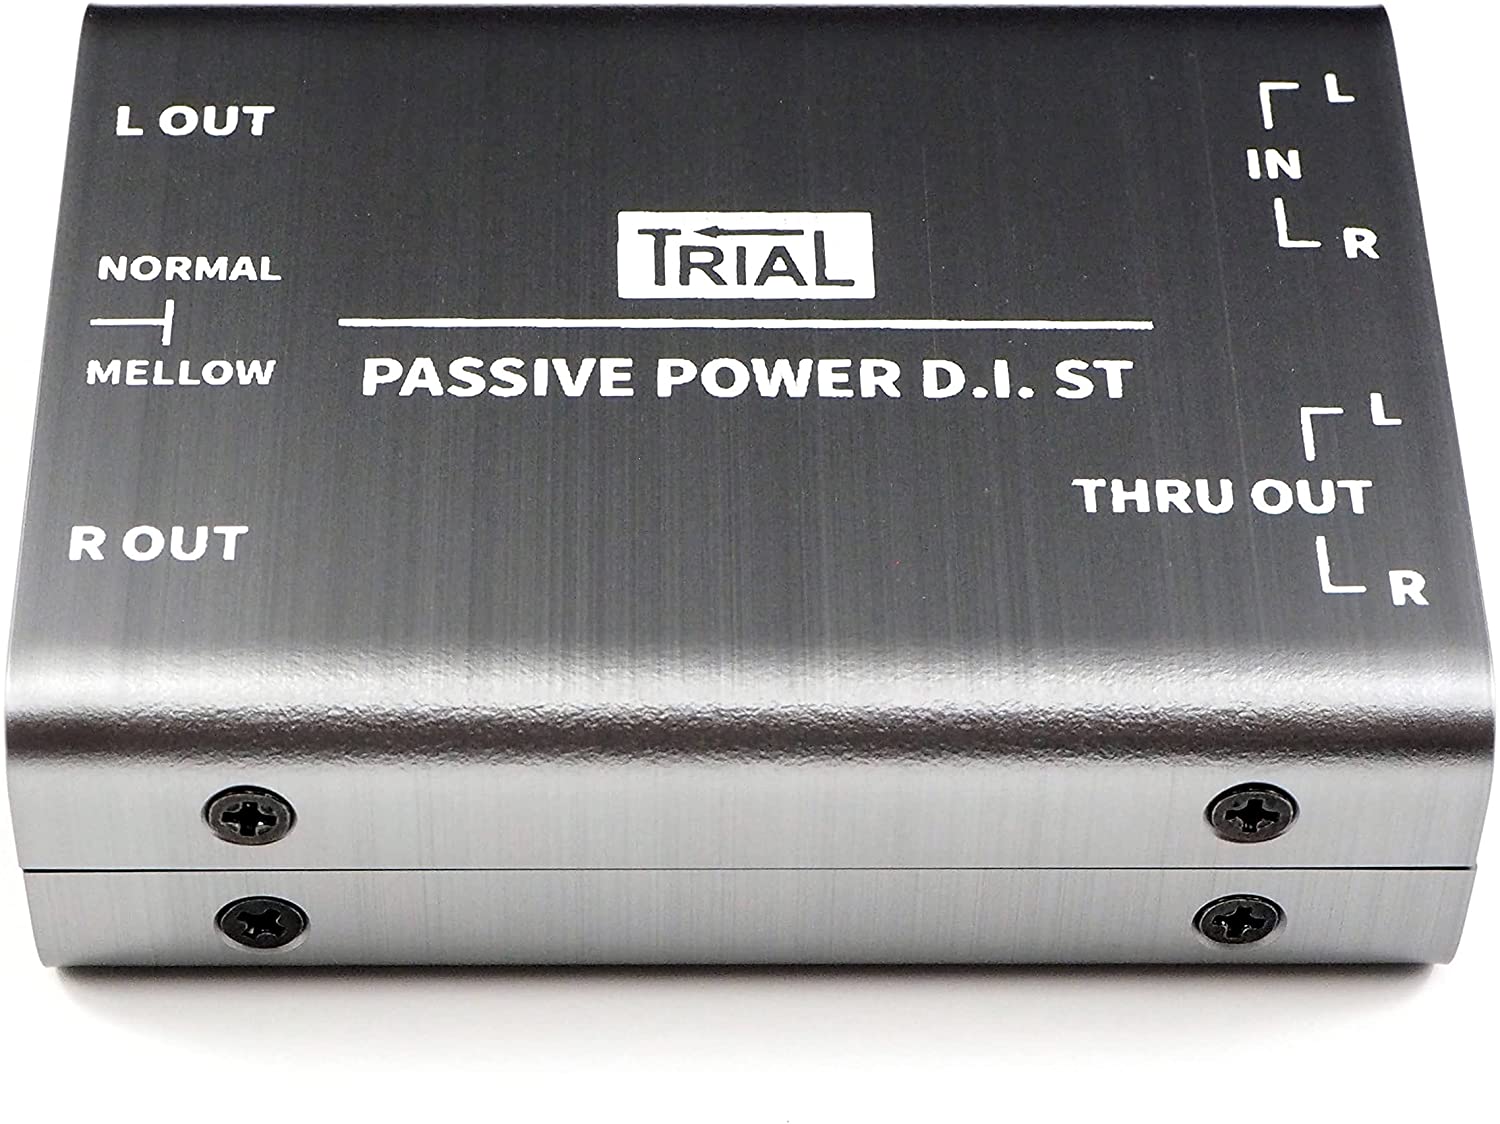 TRIAL PASSIVE POWER D.I. STEREO - Discovery Japan Mall